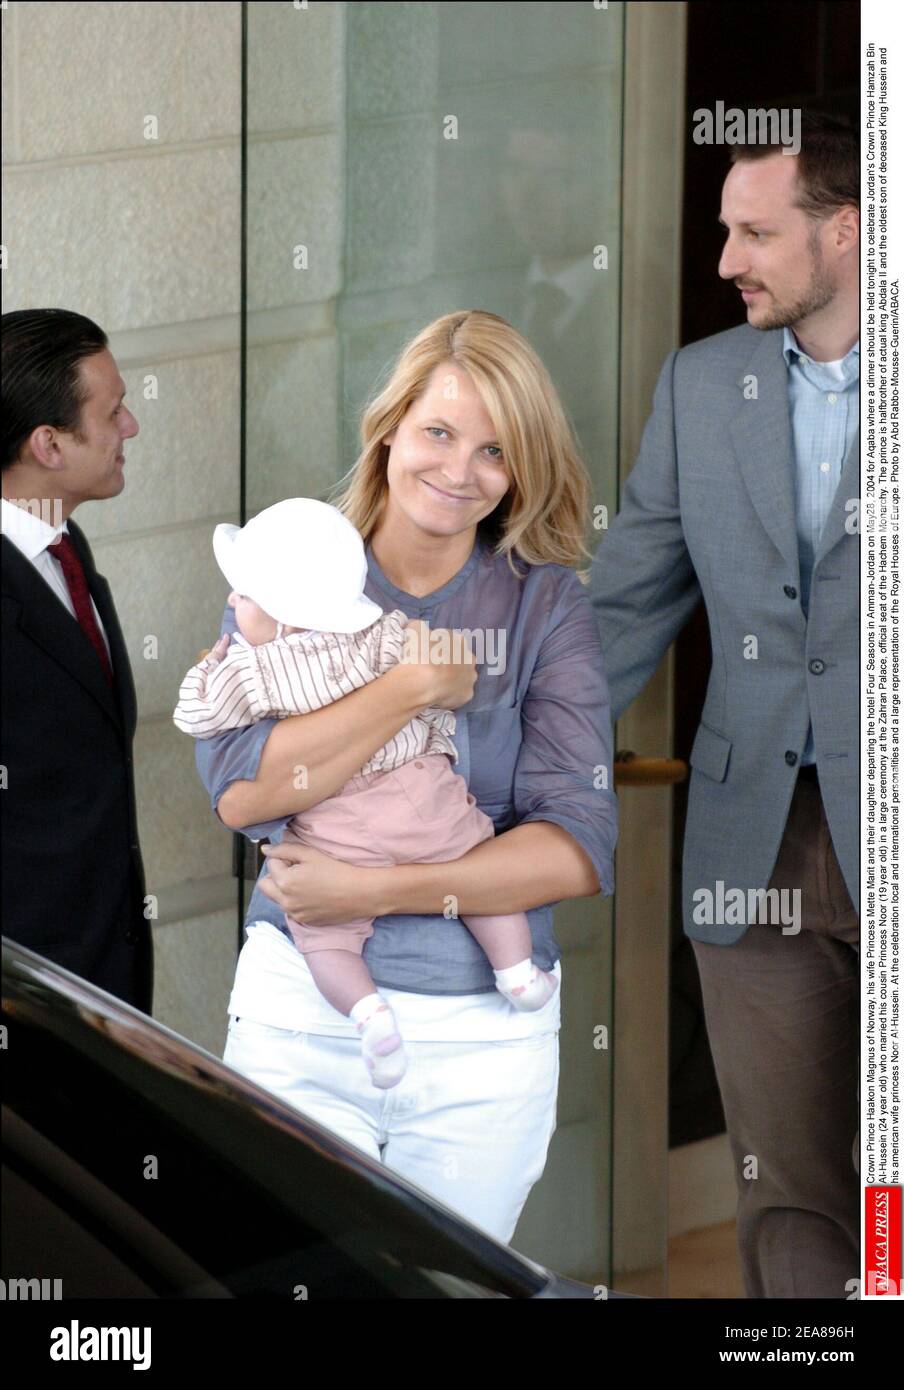 Crown Prince Haakon Magnus of Norway, his wife Princess Mette-Marit and their daughter departing the hotel Four Seasons in Amman-Jordan on May28, 2004 for Aqaba where a dinner should be held tonight to celebrate Jordan's Crown Prince Hamzah Bin Al-Hussein (24 year old) who married his cousin Princess Noor (19 year old) in a large ceremony at the Zahran Palace, official seat of the Hachem Monarchy. The prince is halfbrother of actual king Abdala II and the oldest son of deceased King Hussein and his american wife princess Noor Al-Hussein. At the celebration local and international personalities Stock Photo